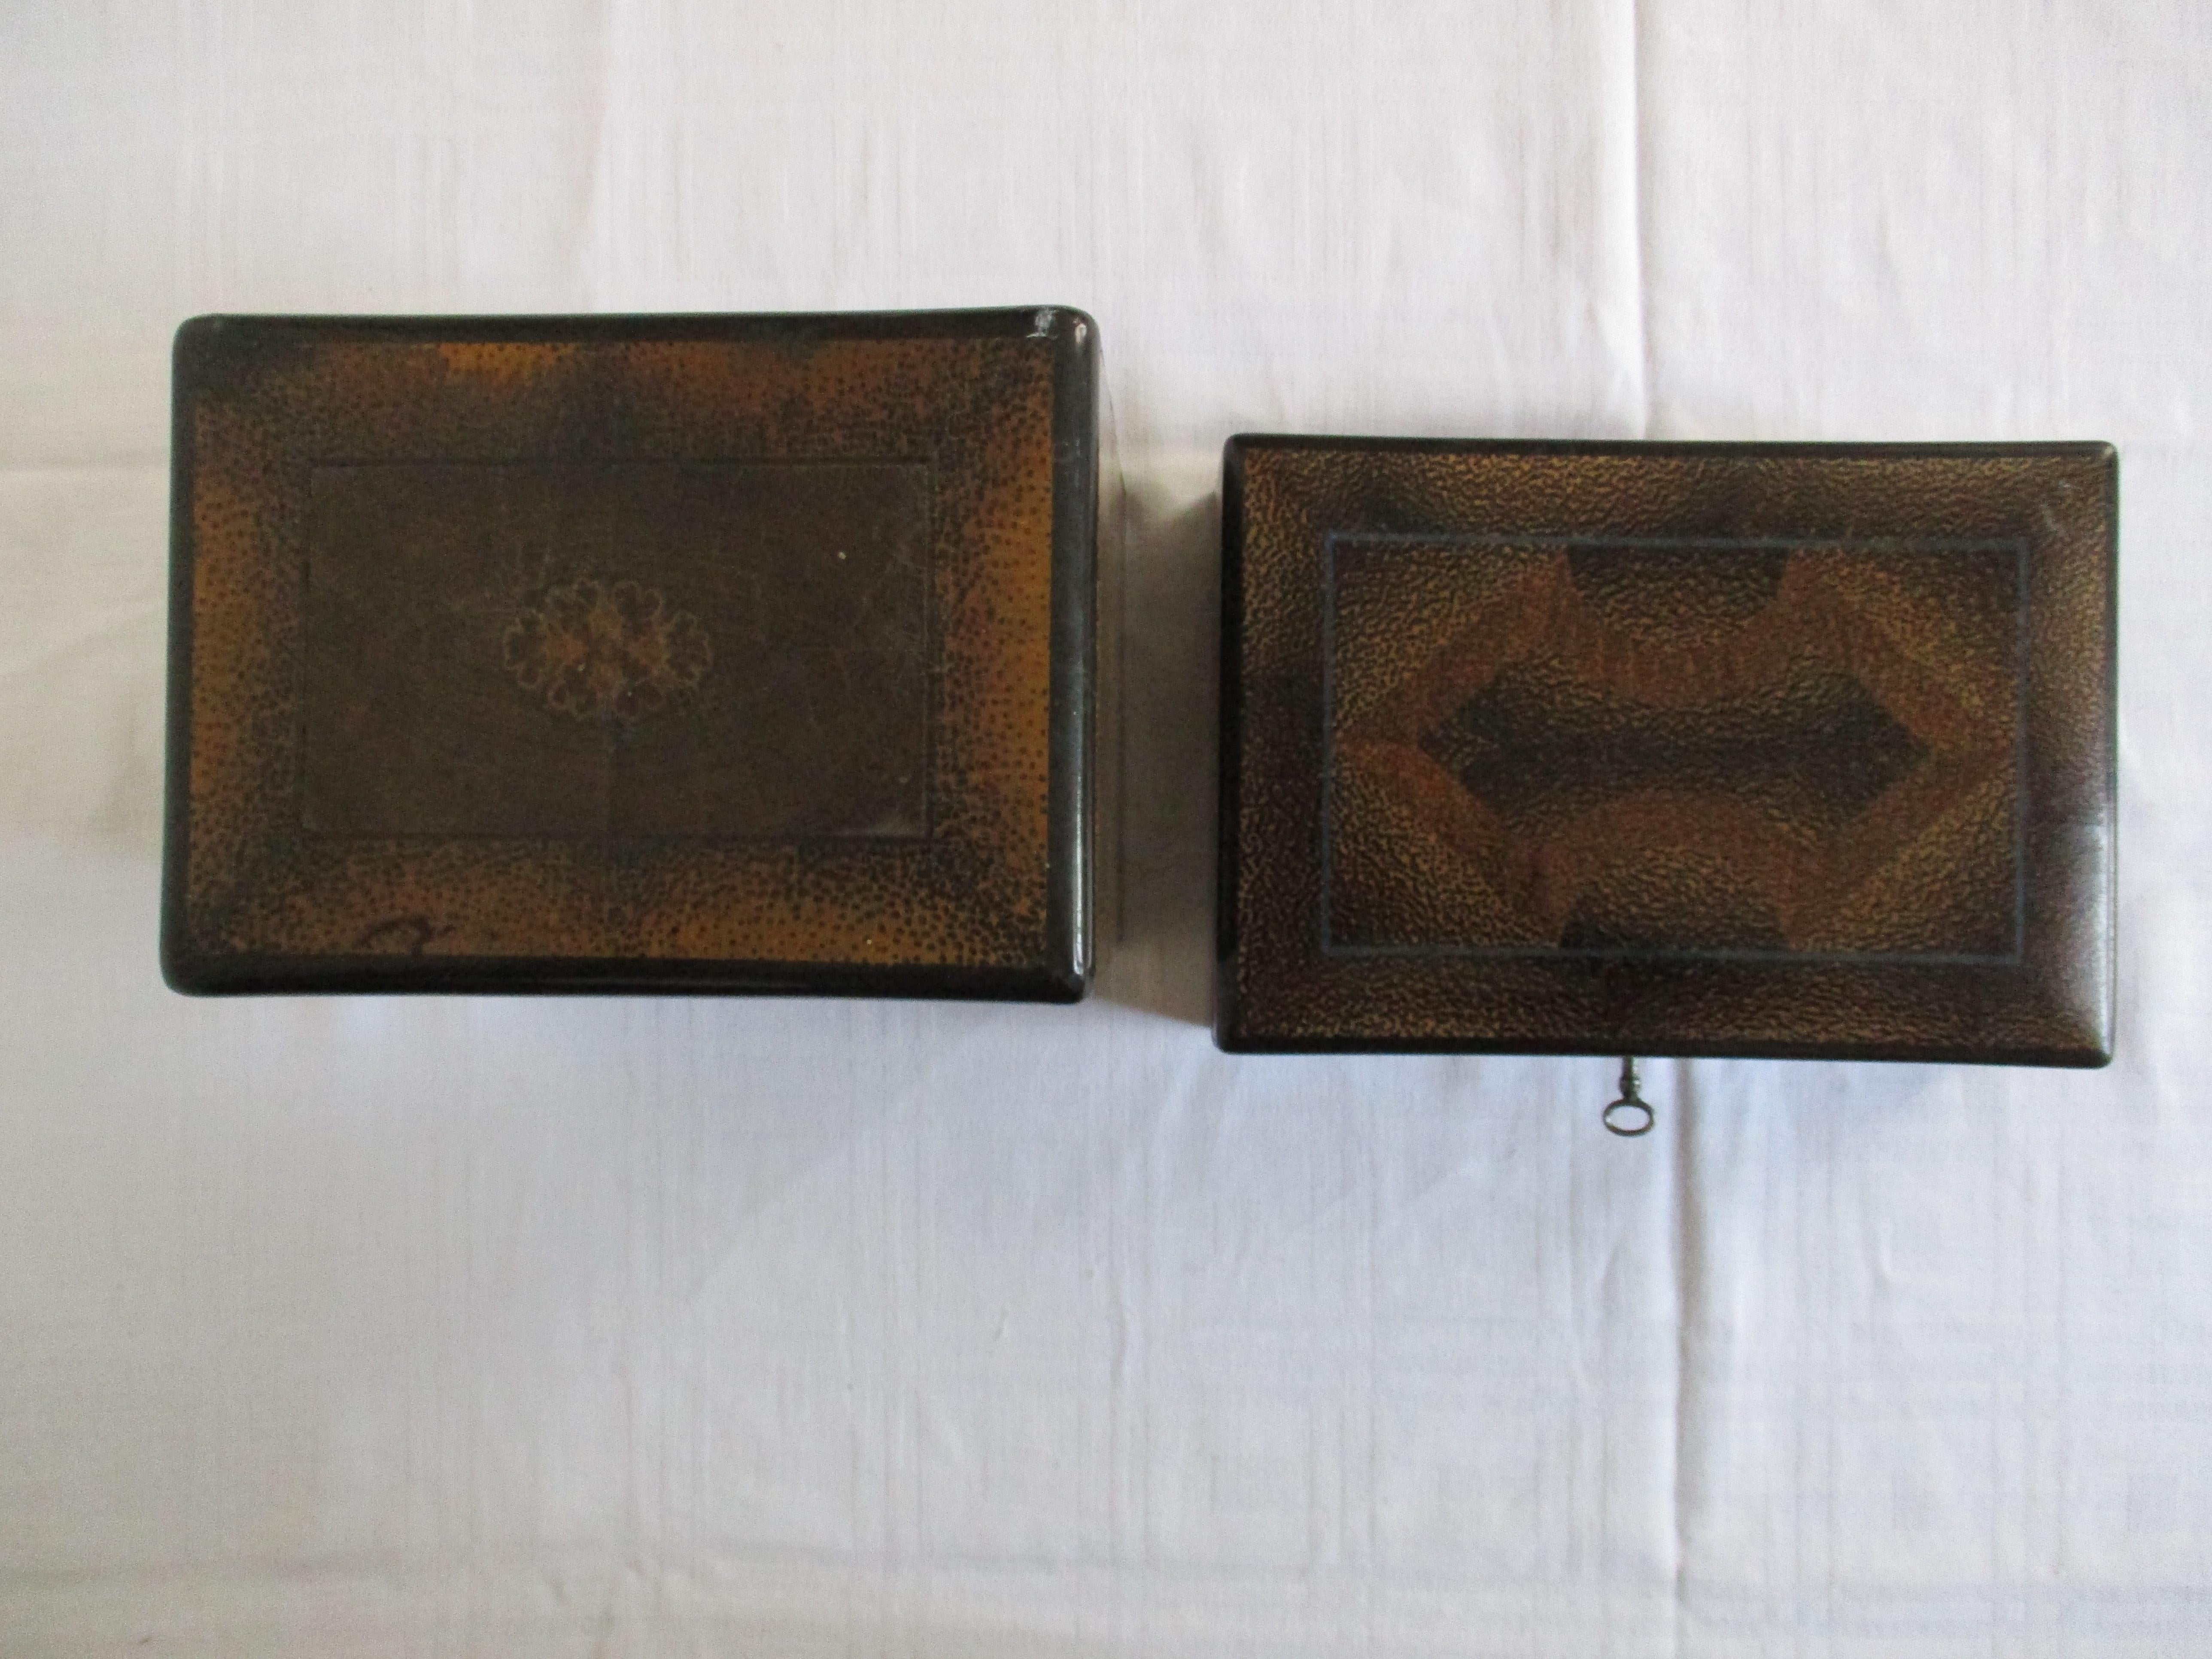 A set of beautiful tobacco boxes made in Austria. 
Made i.n the Art Nouveau/Art Deco period. 

The measurements are: 
Depth: 14.5 cm - Width: 21 cm - Height: 6.5 cm
Depth: 12.5 cm - Width: 17 cm - Height: 16.5 cm